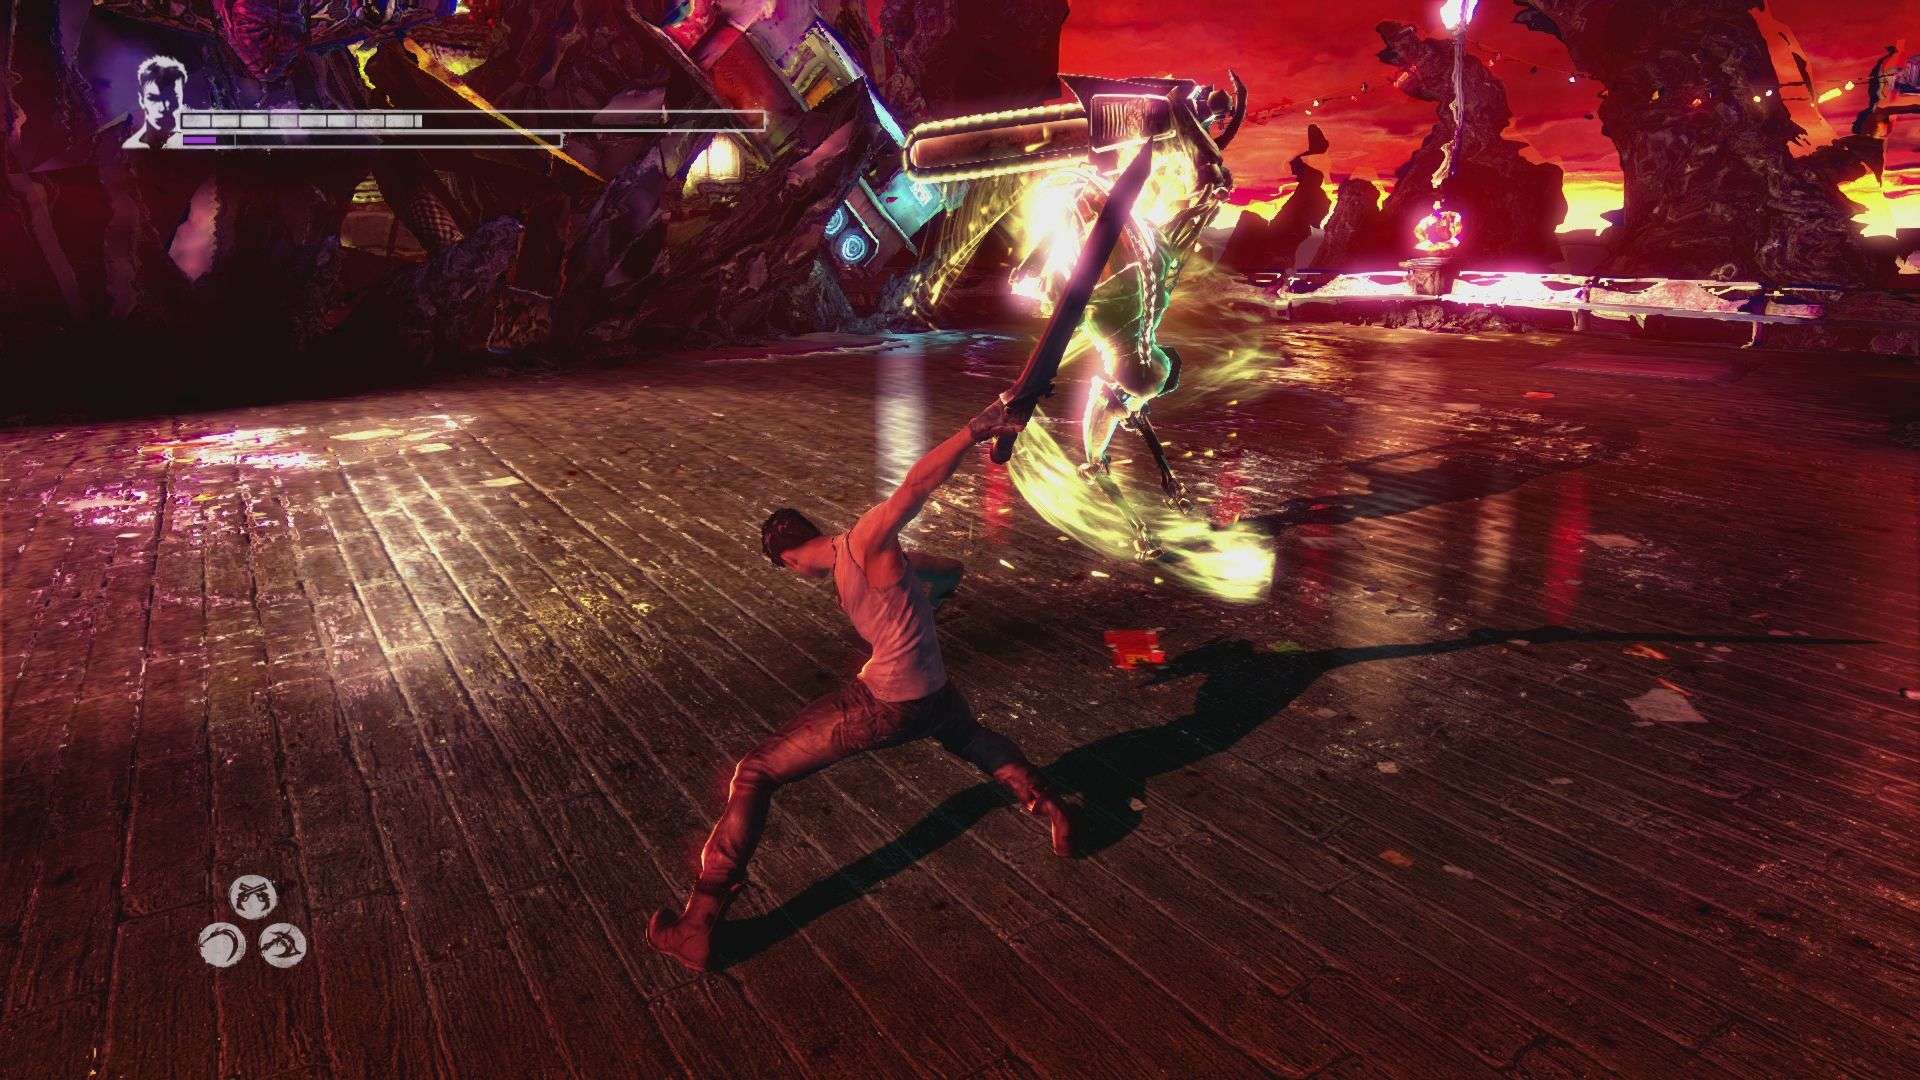 DmC: Devil May Cry Definitive Edition - Review 